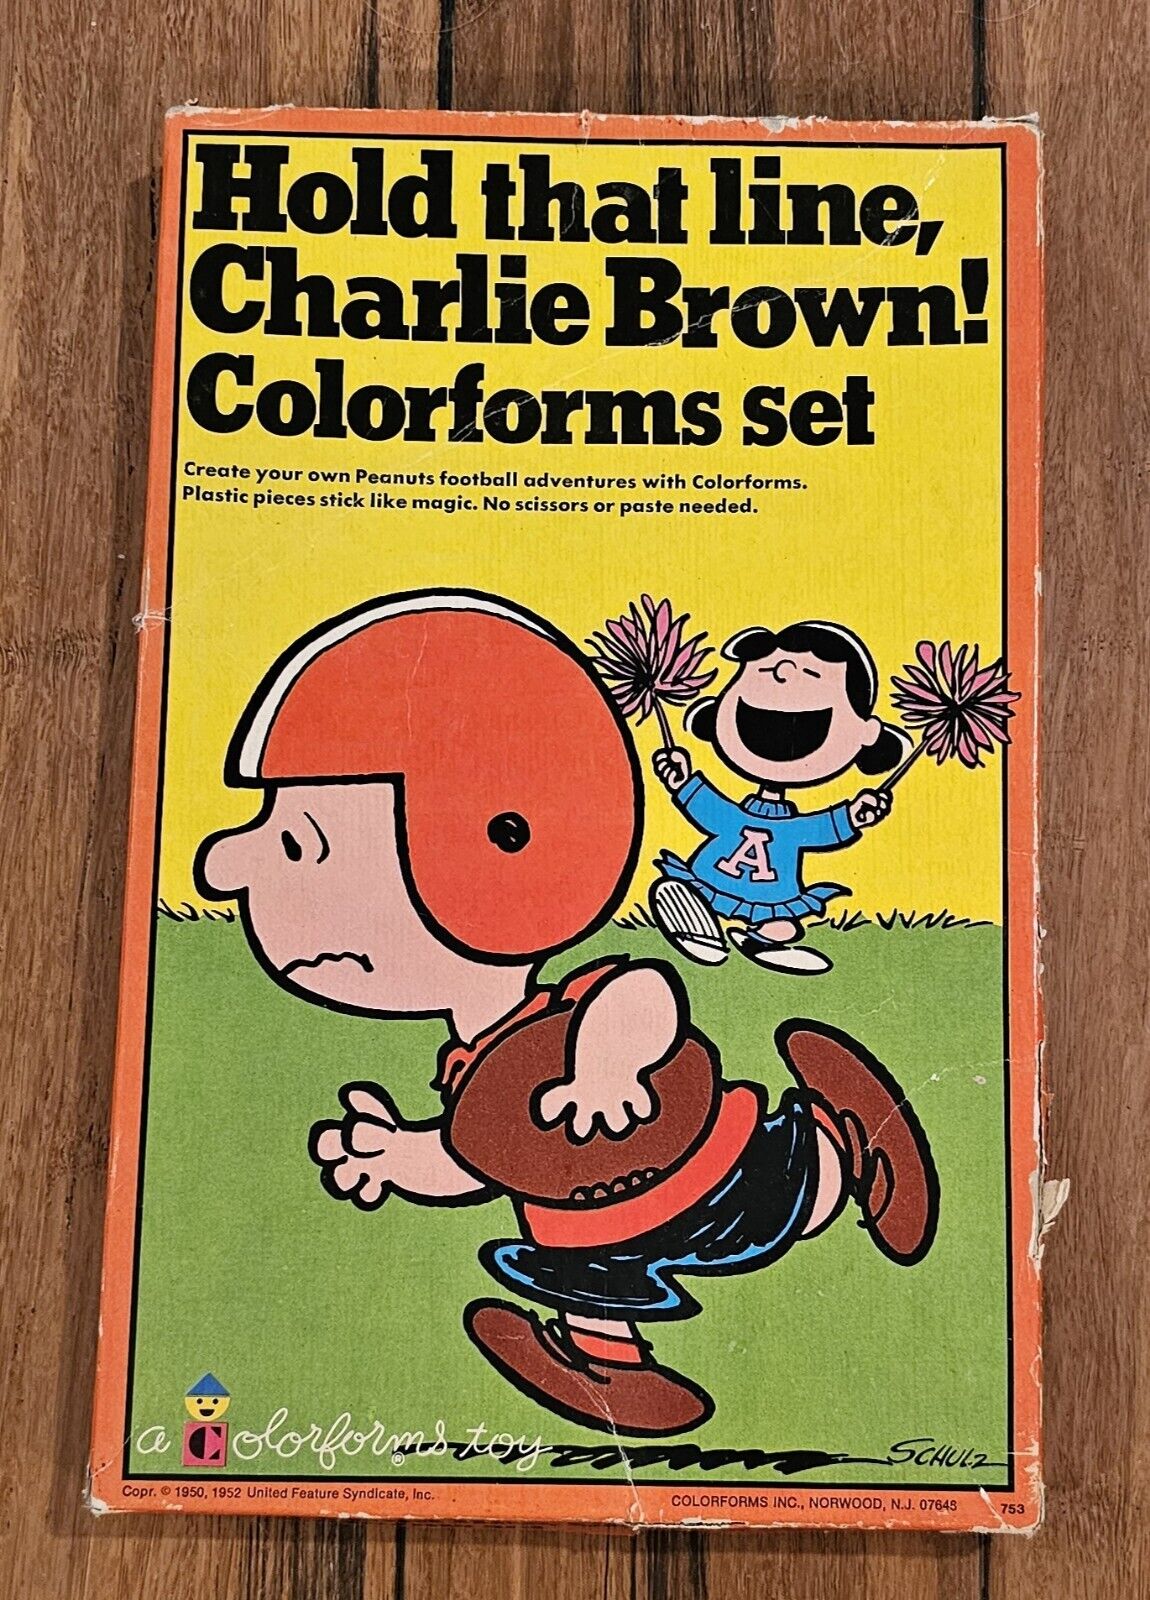 You’re A Pal Snoopy Colorforms Football Set Vintage Peanuts Charlie Brown READ